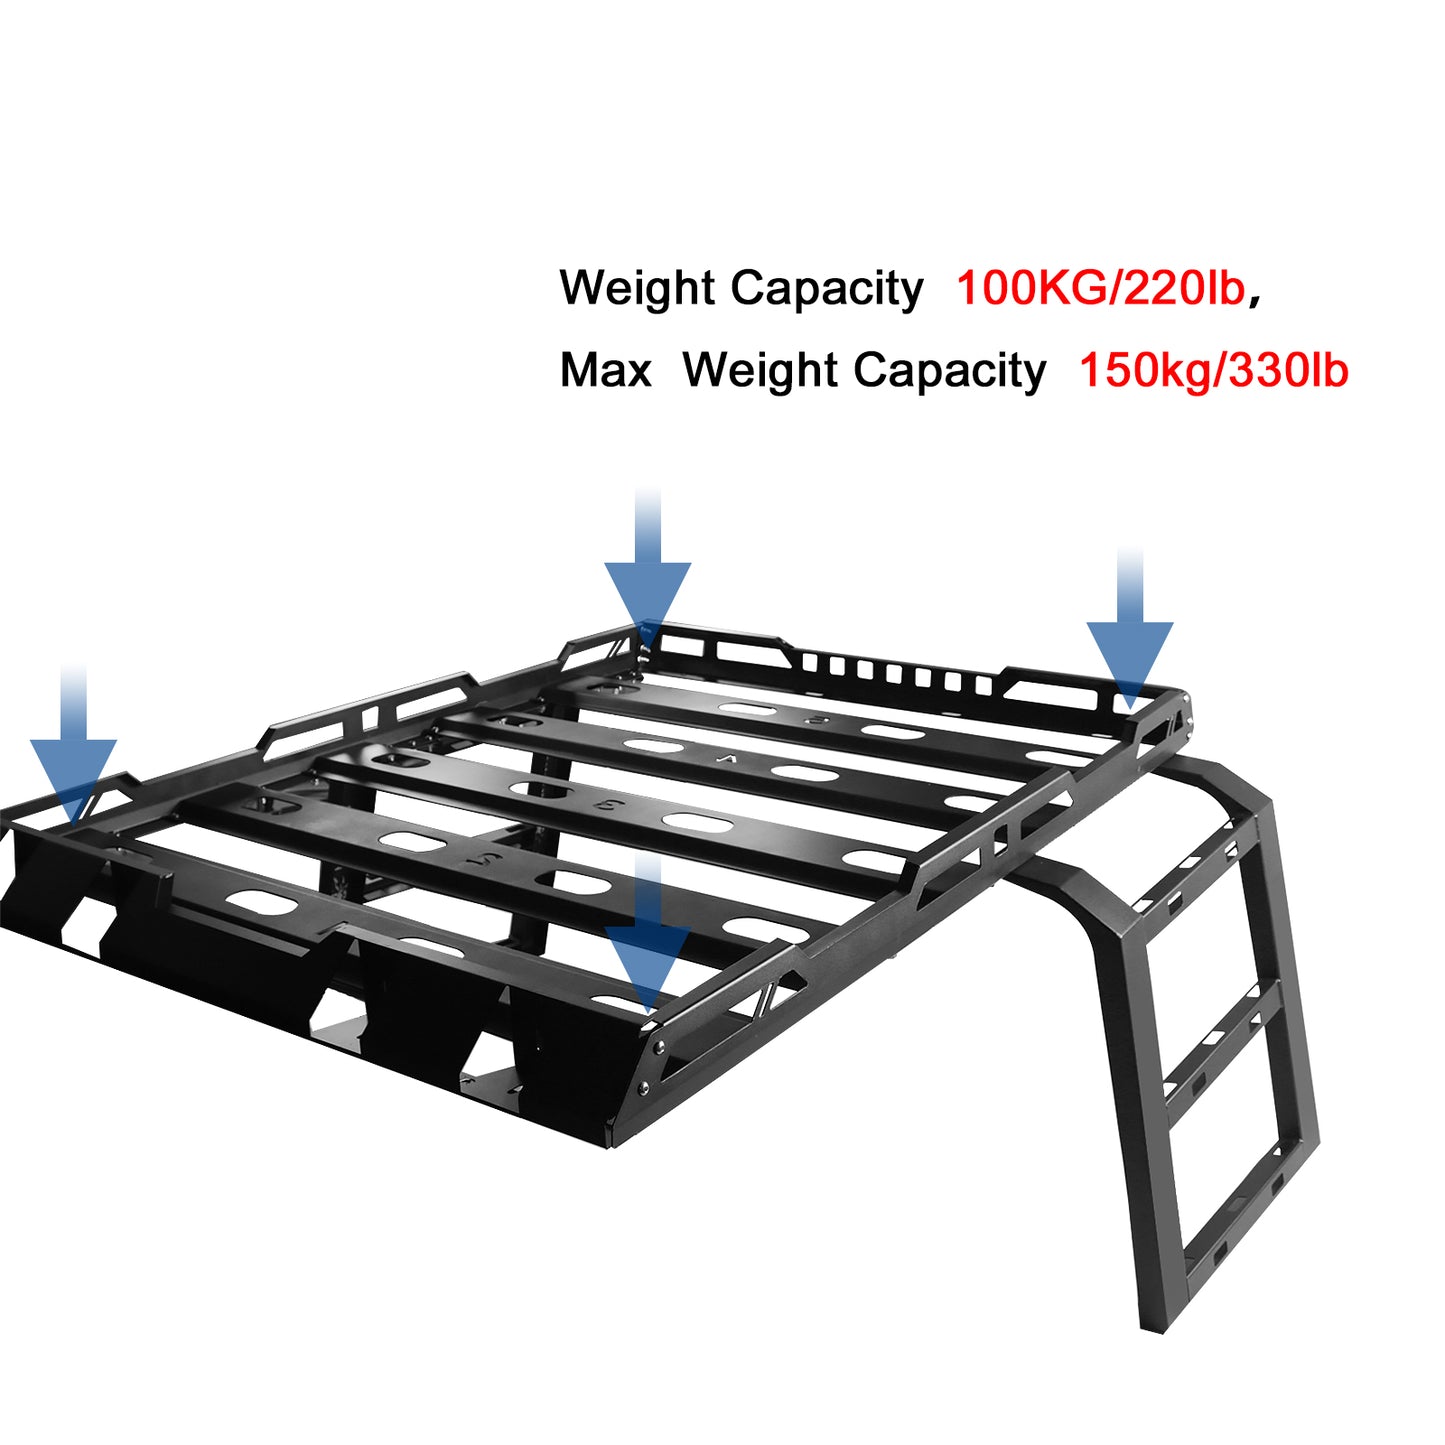 BoardRoad Roof Rack Cargo Basket with Double Ladders Steel Black for 2018-2023 Jeep Wrangler JL JLU 4DR / 2020-2023 Gladiator (No Drill)